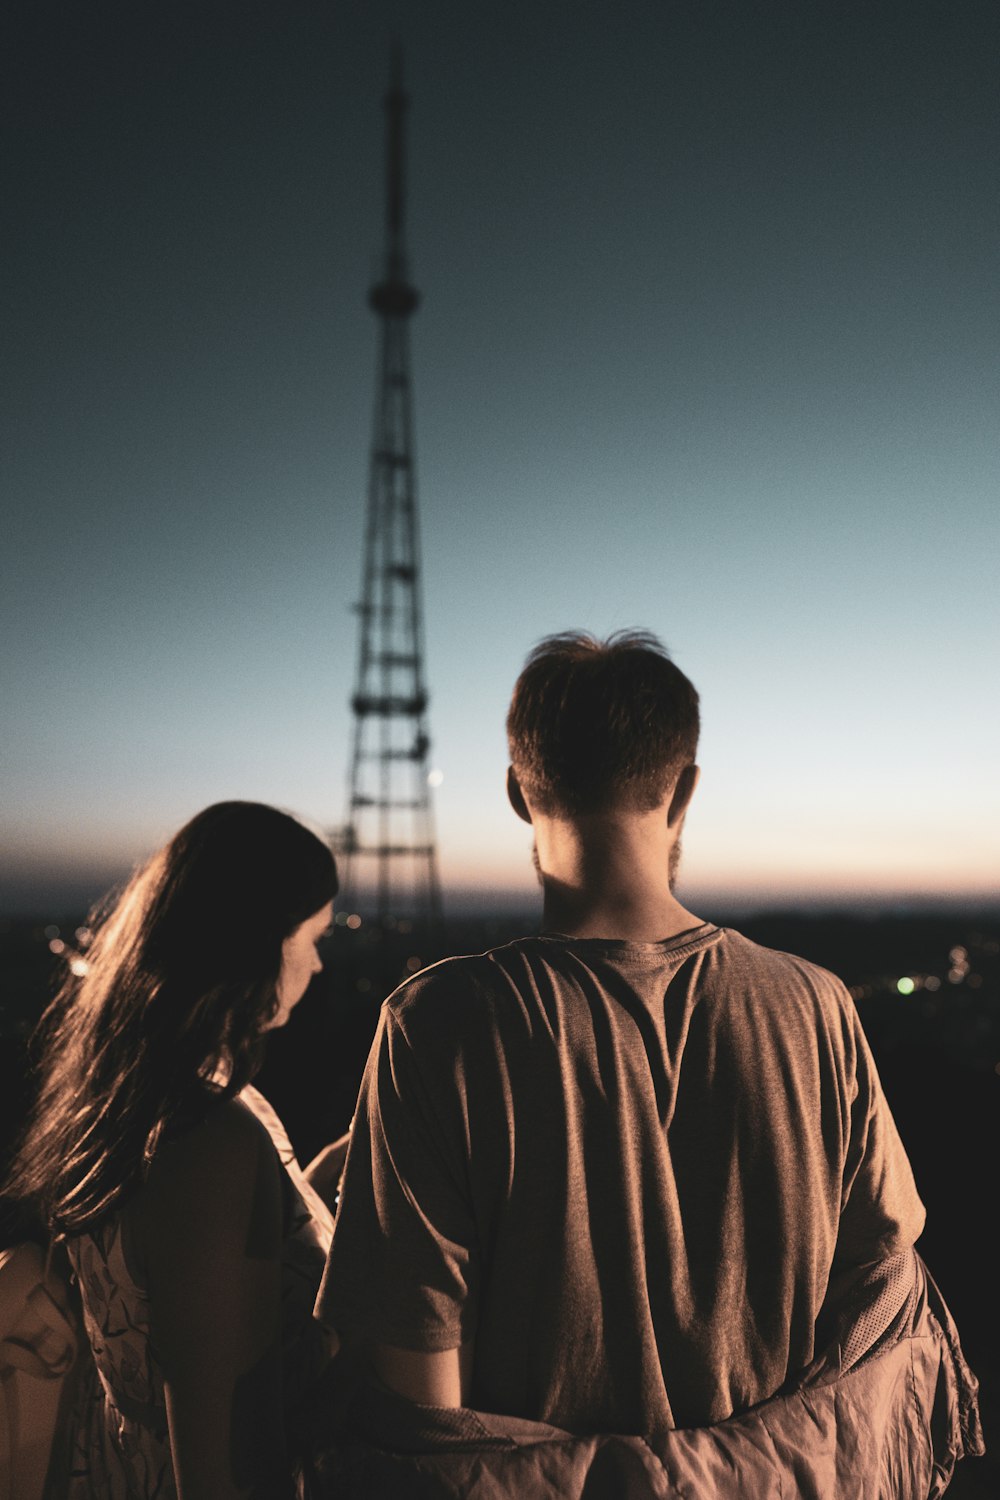 silhouette of man and woman standing near tower during sunset